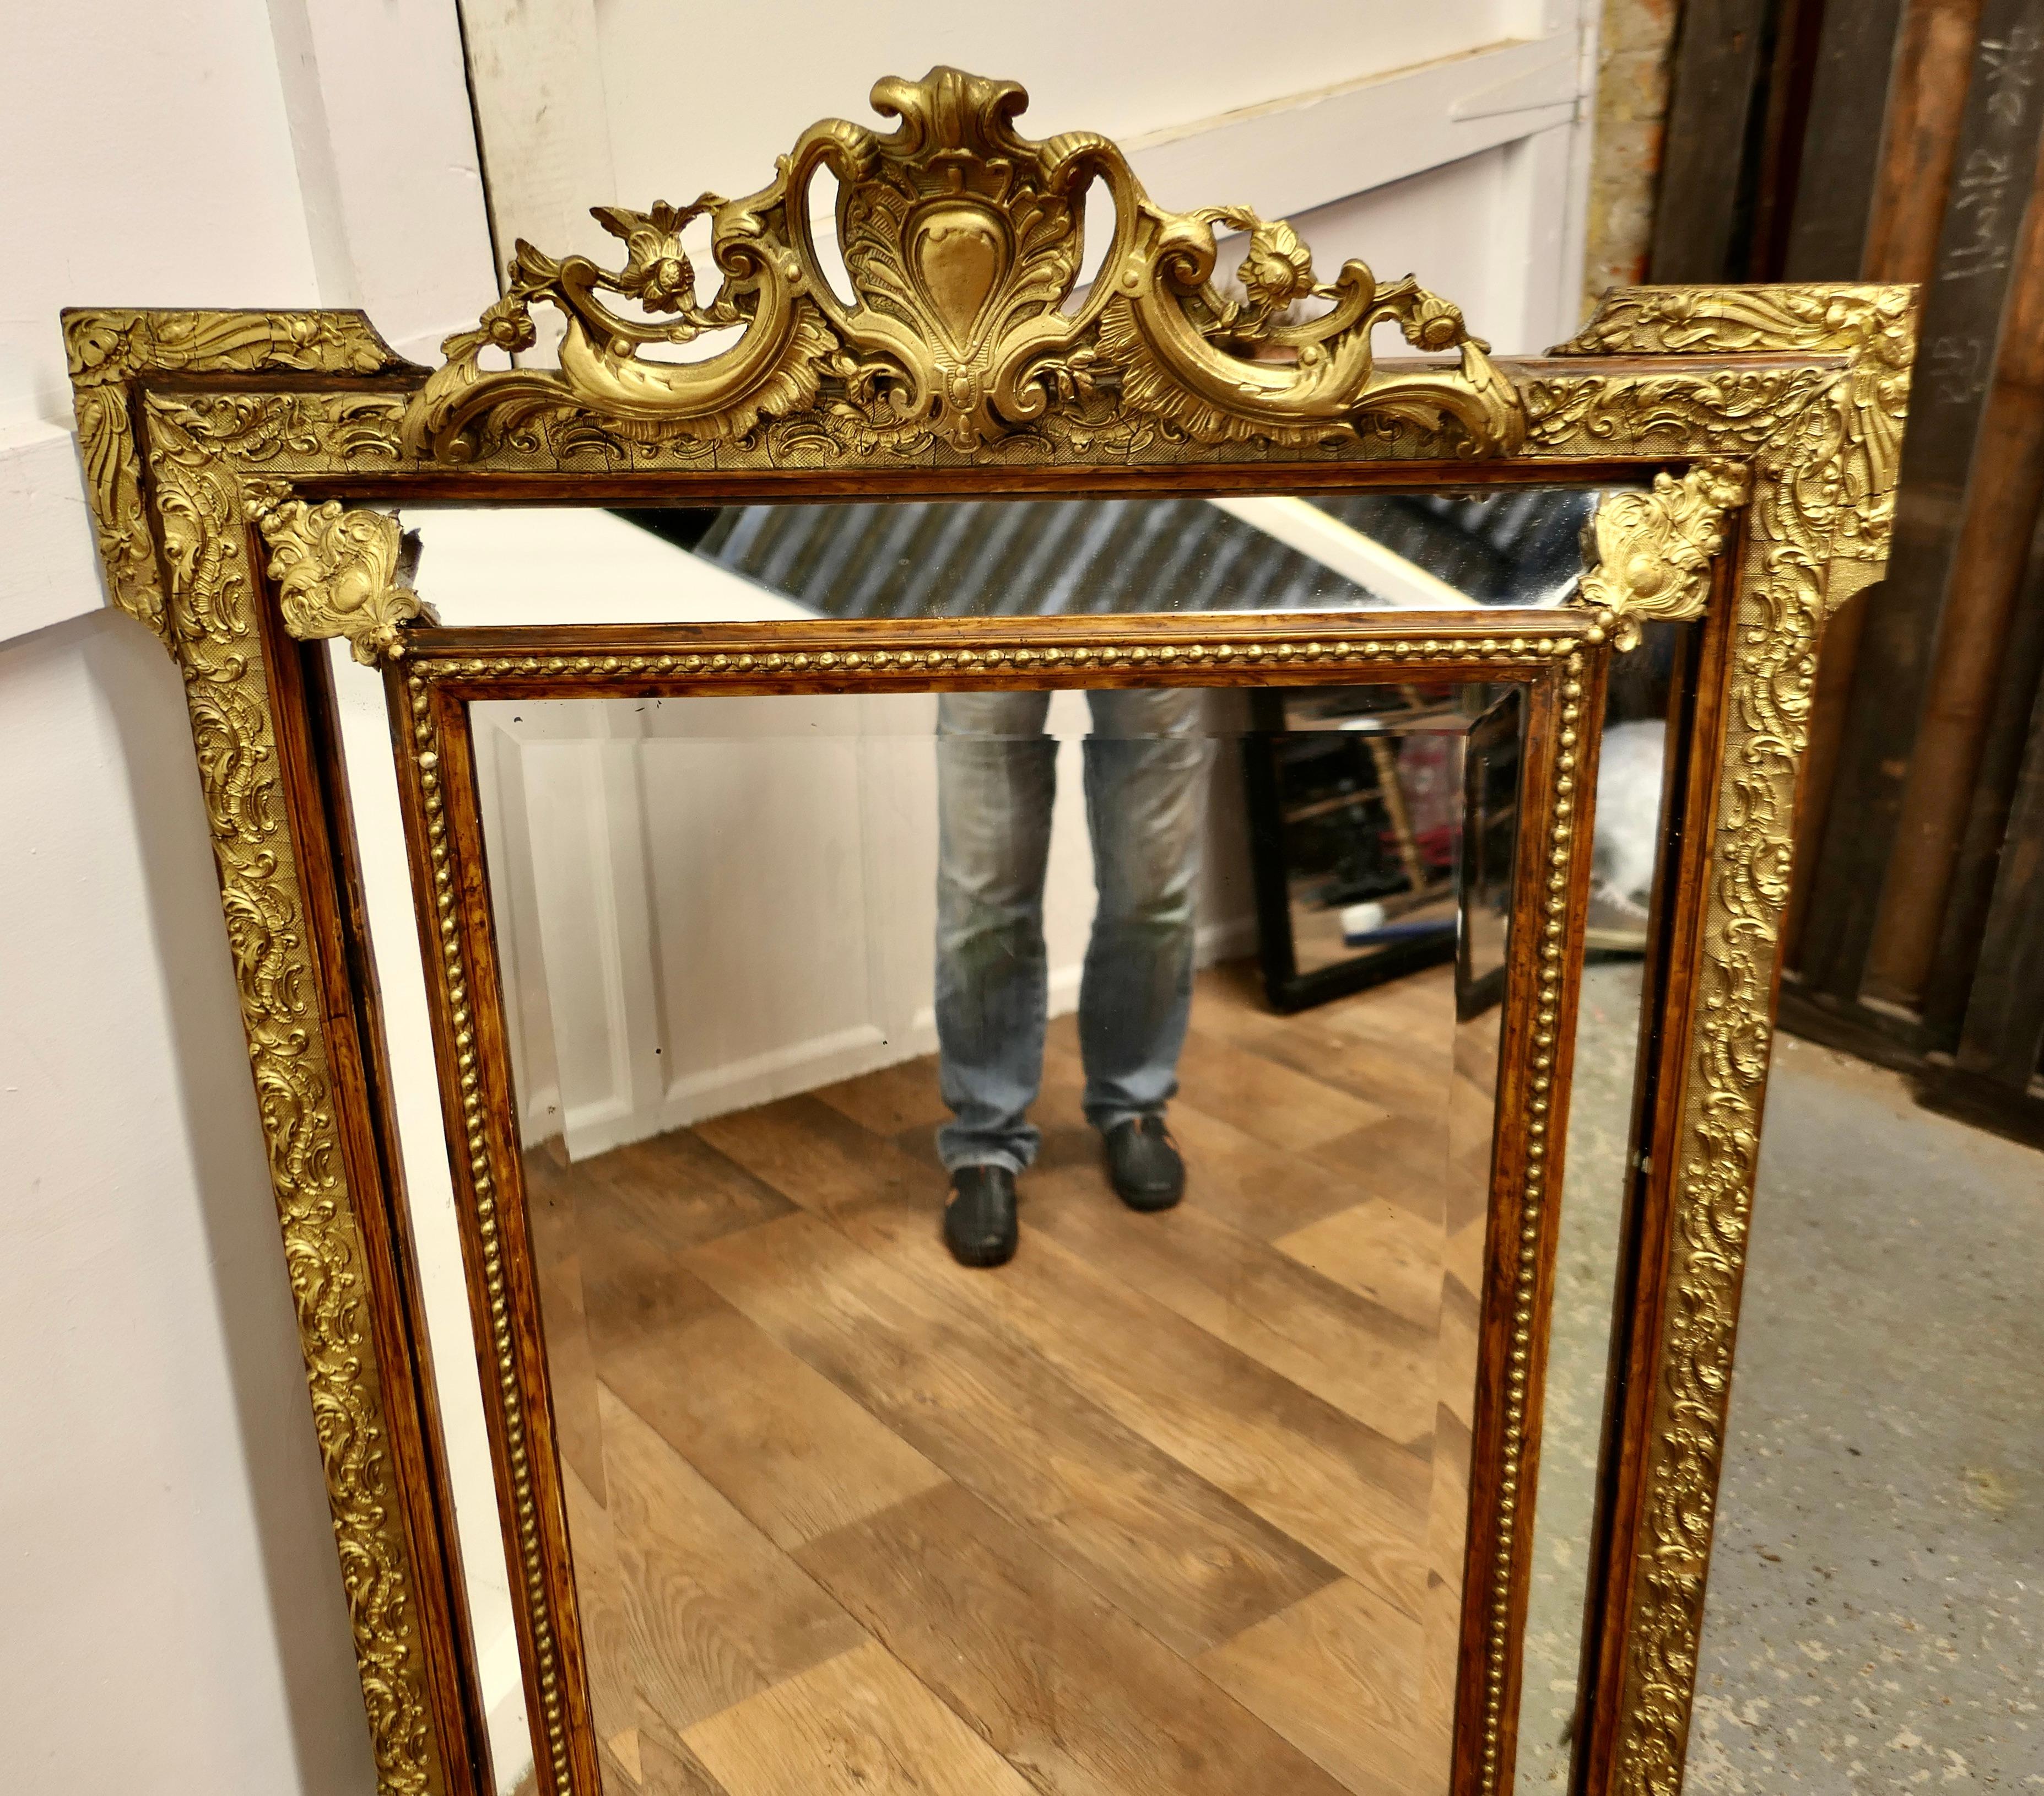 19th Century A Stunning Napoleon III French Cushion Mirror  This is an exquisite piece a fine For Sale